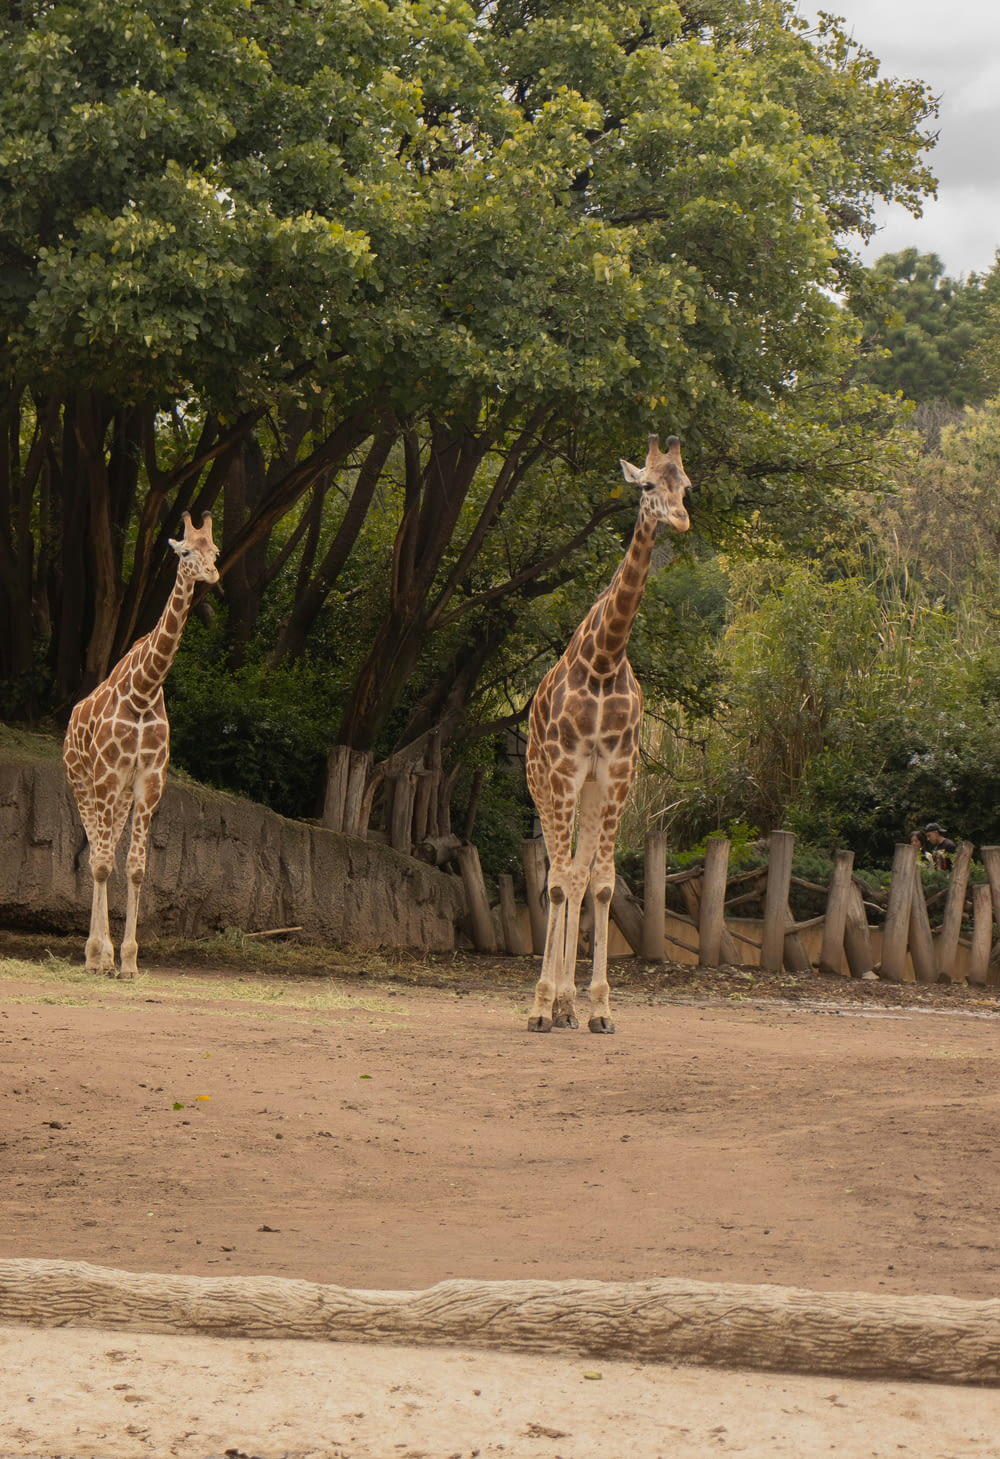 a couple of giraffe standing next to each other on a dirt field